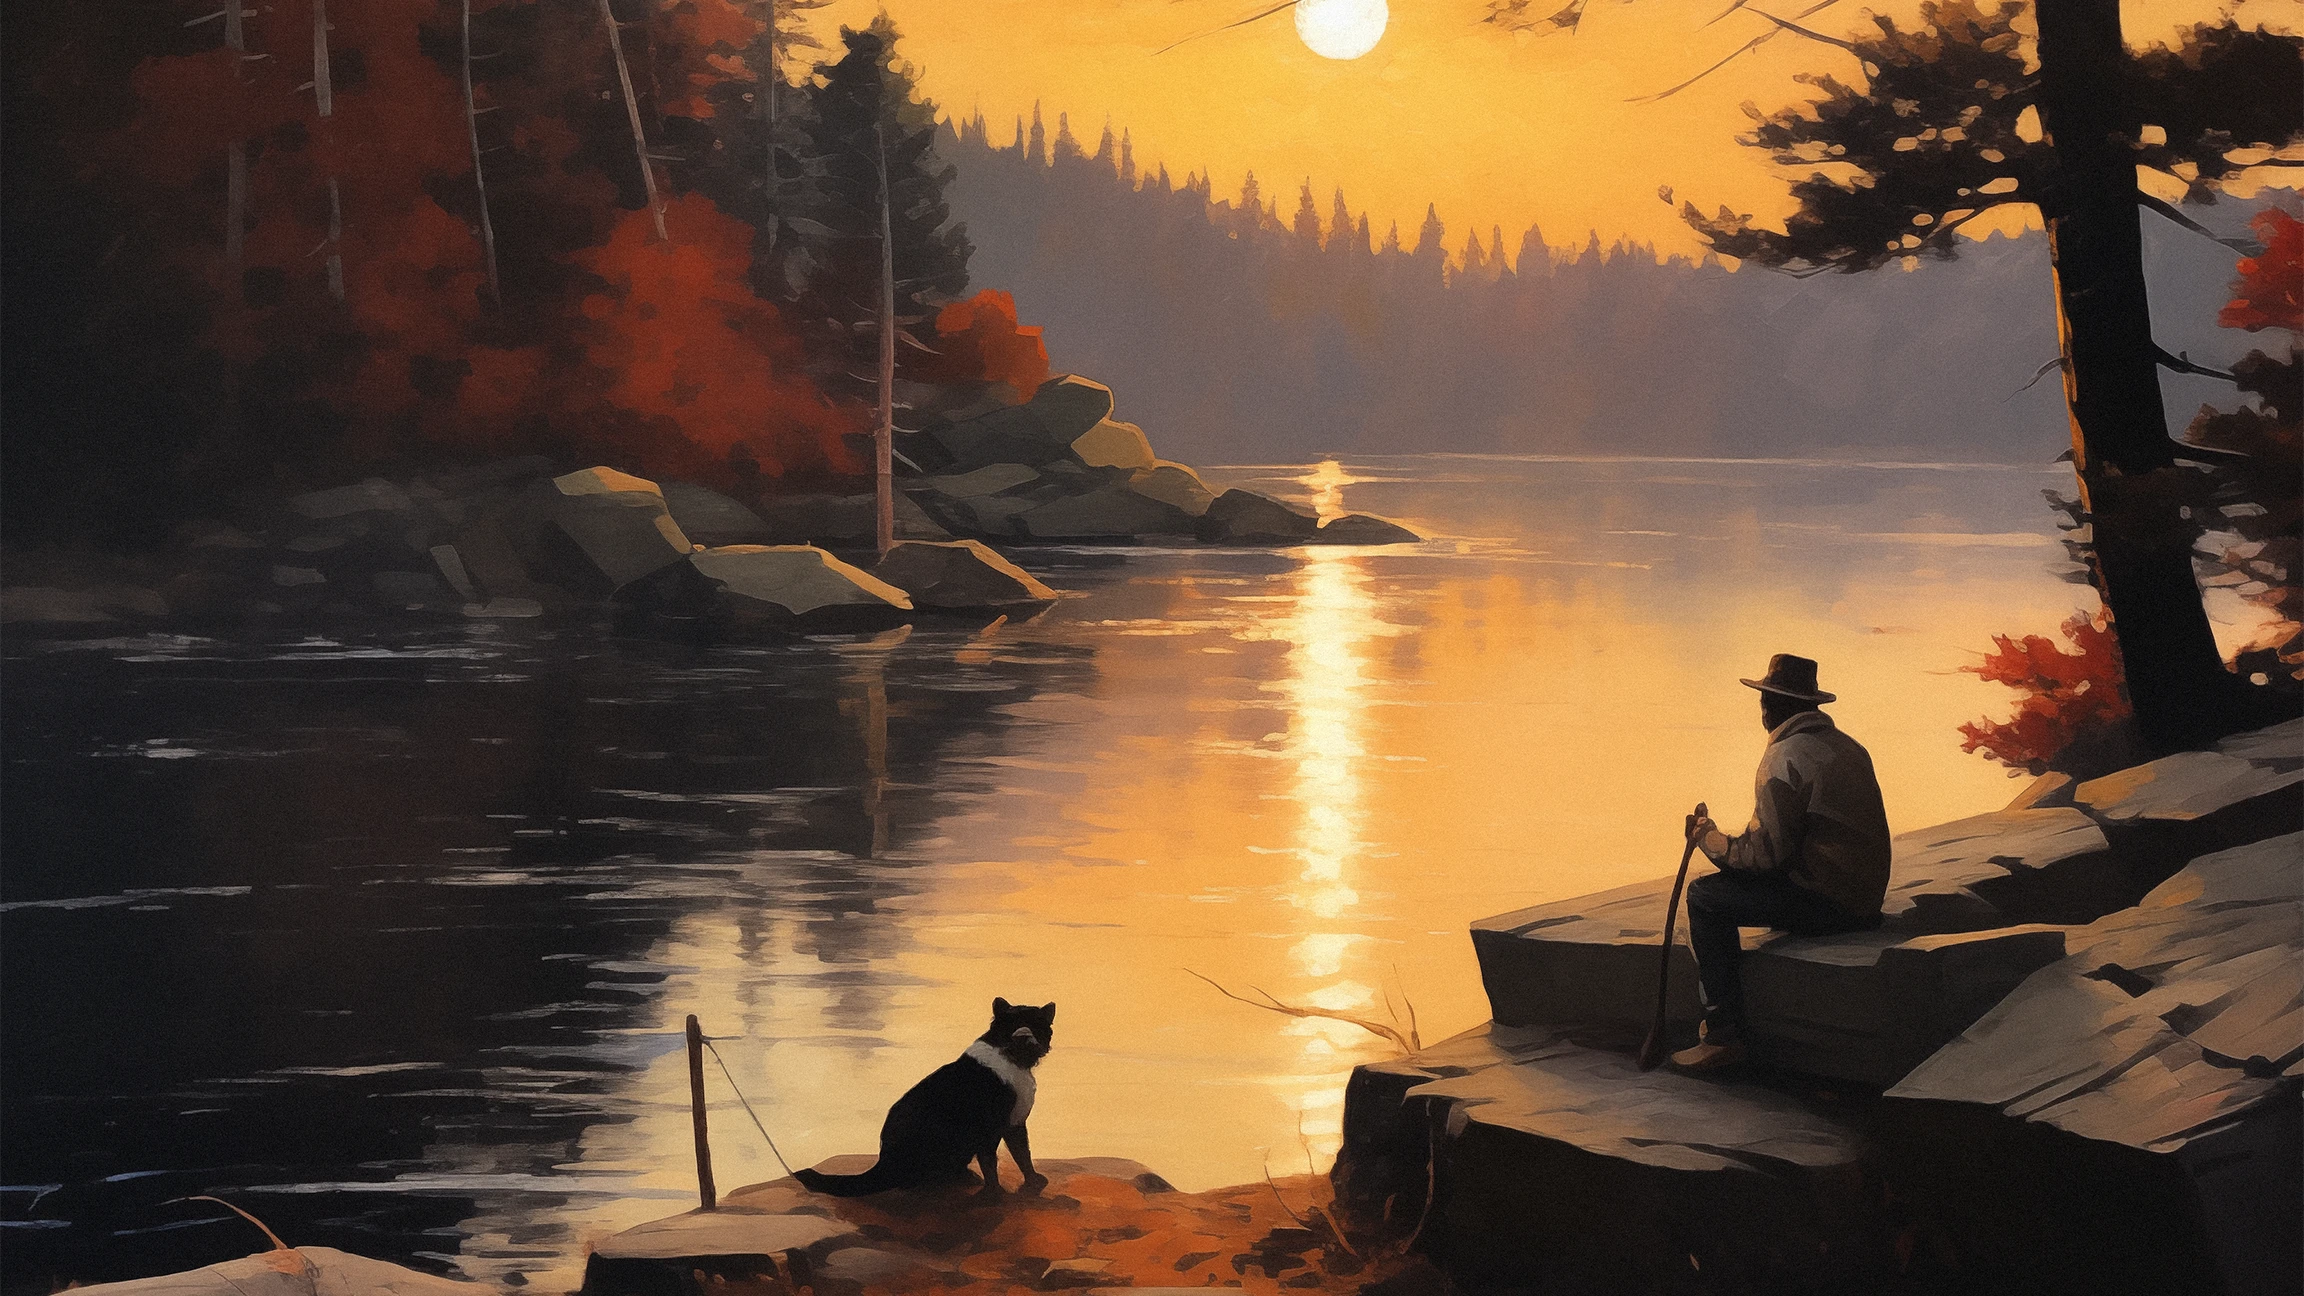 an impressionist style oil painting of a man and dog sitting on rocks by a river during sunrise - image generated by MidJourney